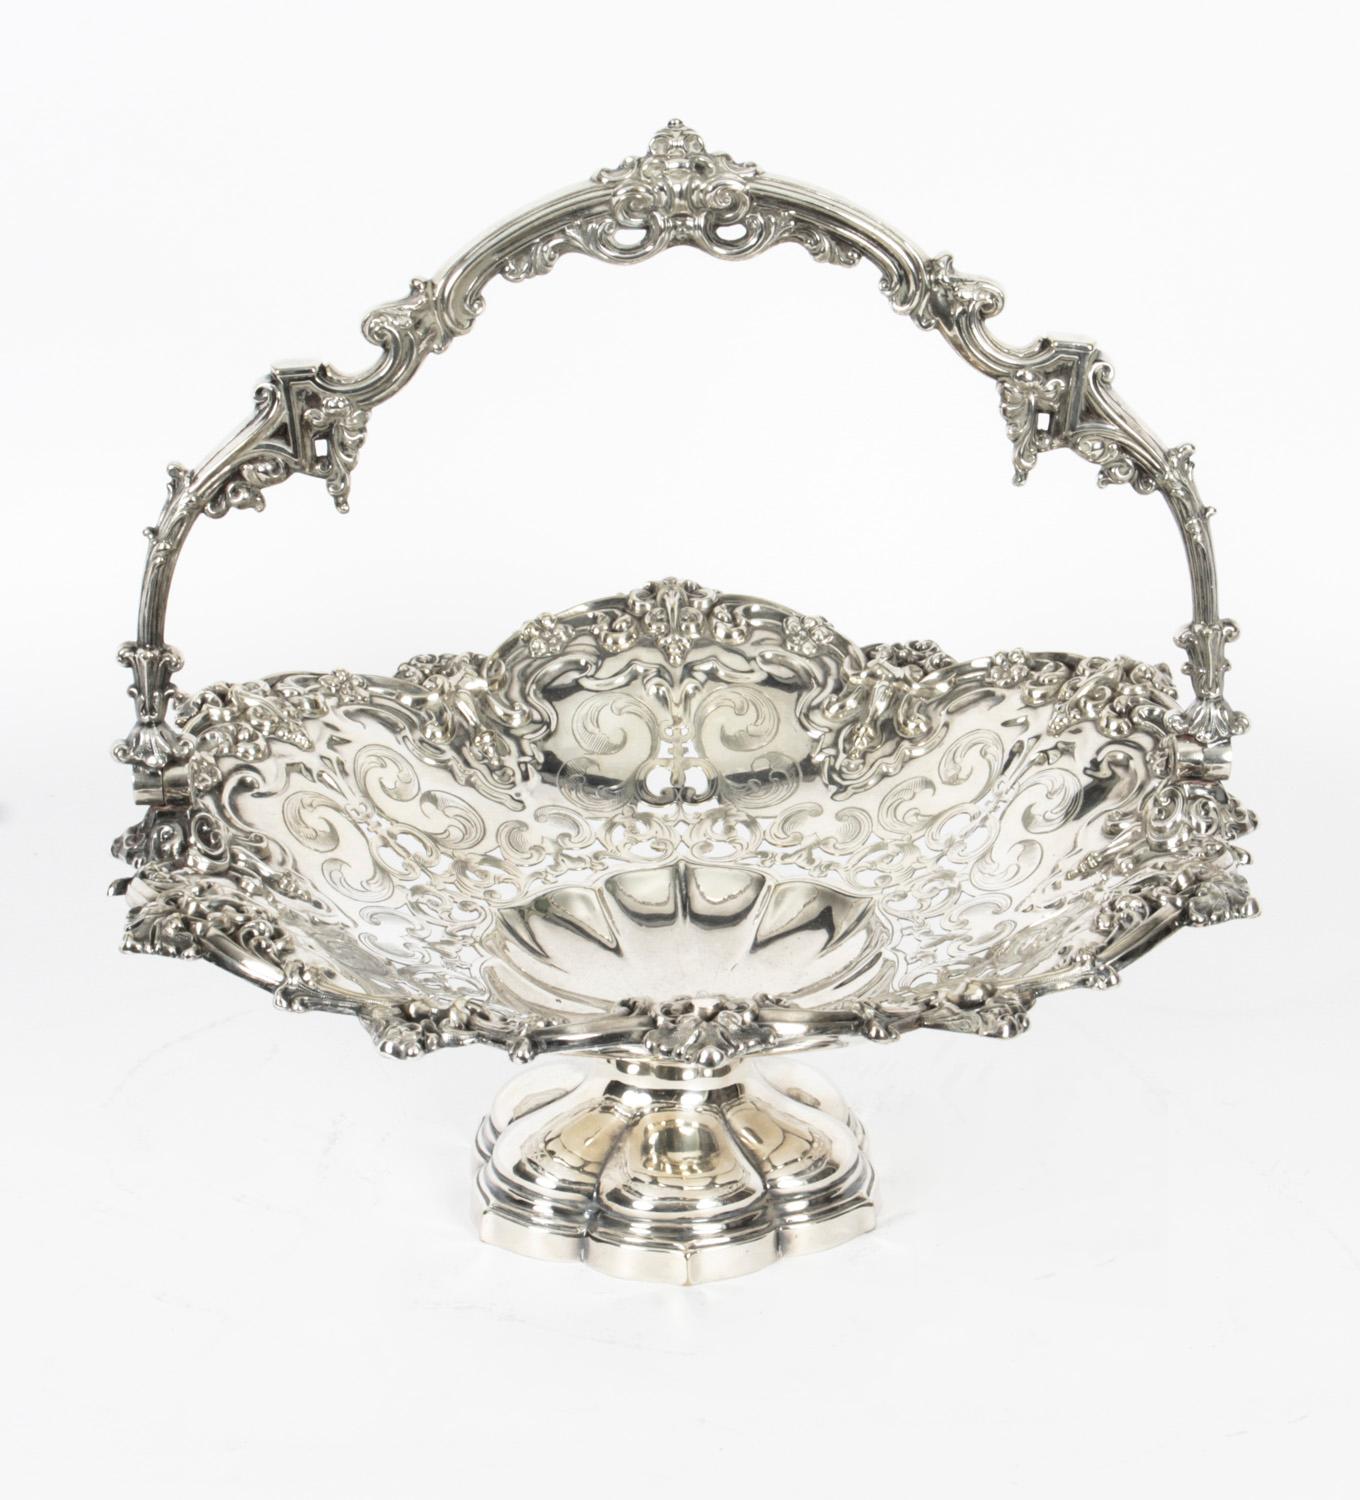 This is a stunning antique Victorian Sheffield Plate silver plated fruit basket with the makers mark of Henry Wilkinson & Co, circa 1830 in date.

The round shpaed body features fabulous engraved and cut out foliate and floral decoration..

It